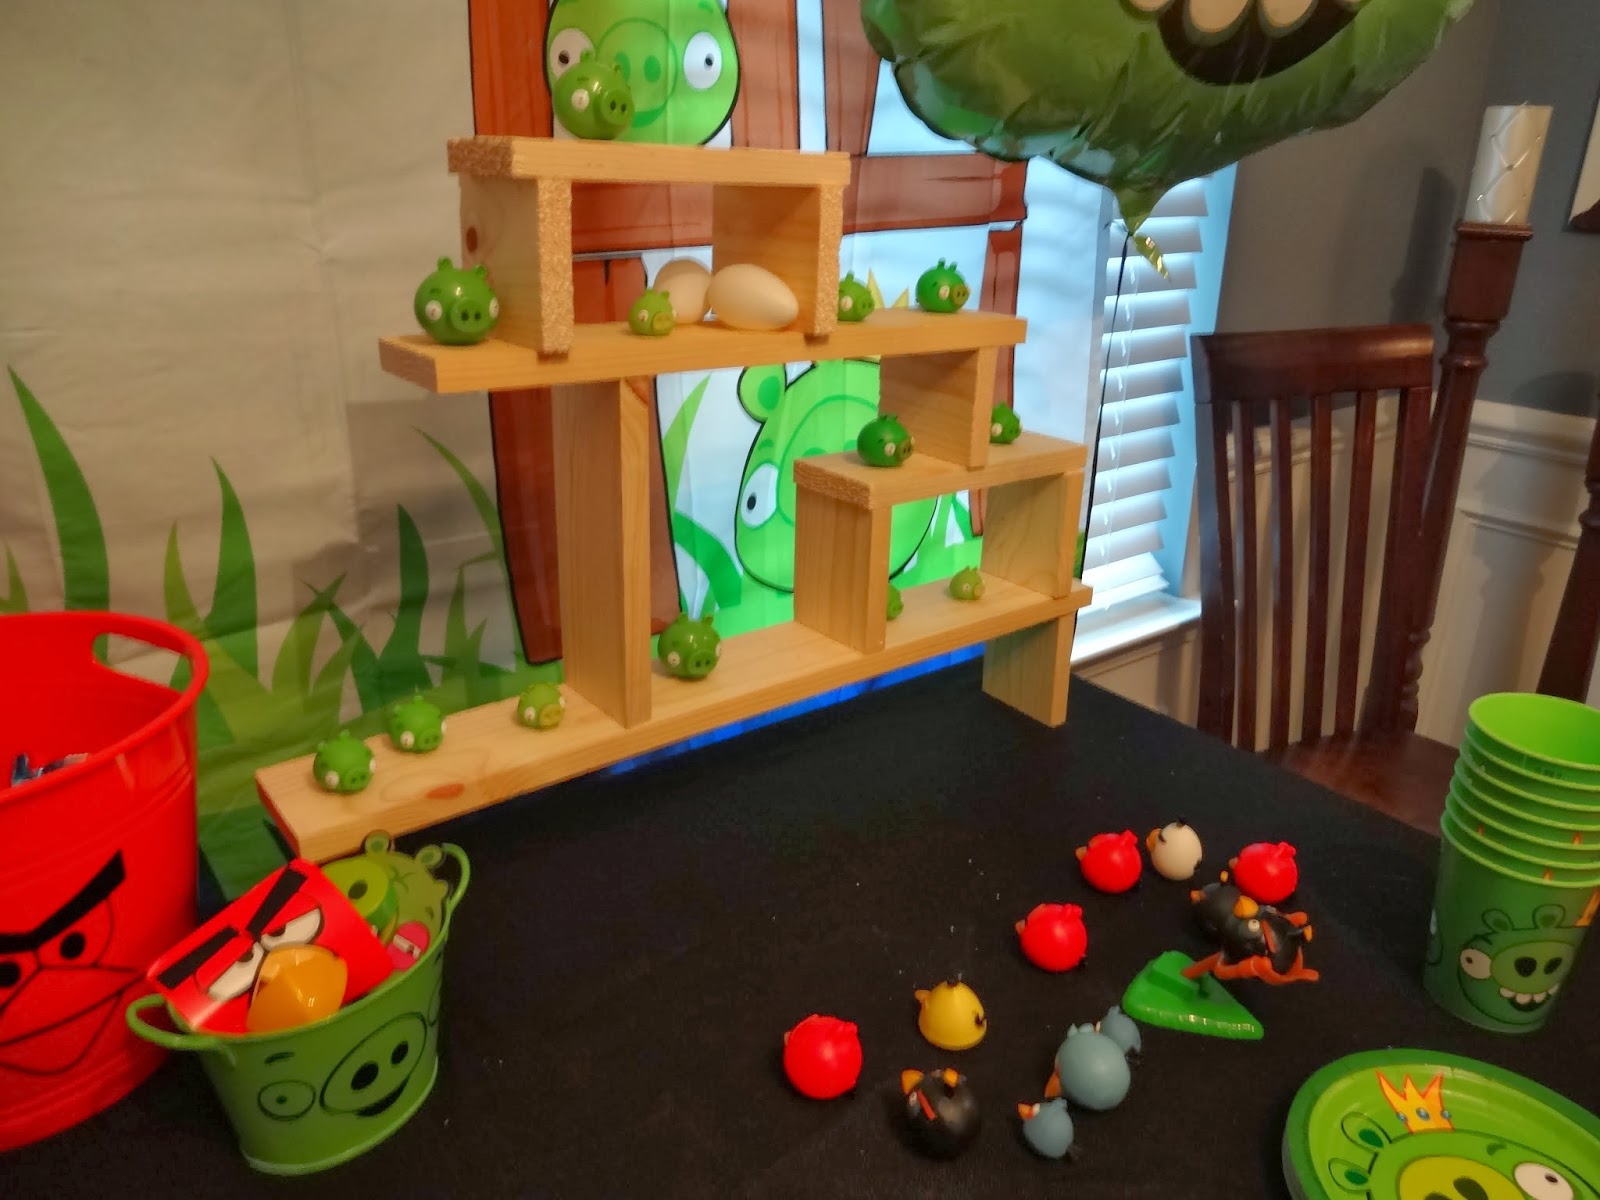 This Home of Ours with a Jewish twist: Angry Bird Party